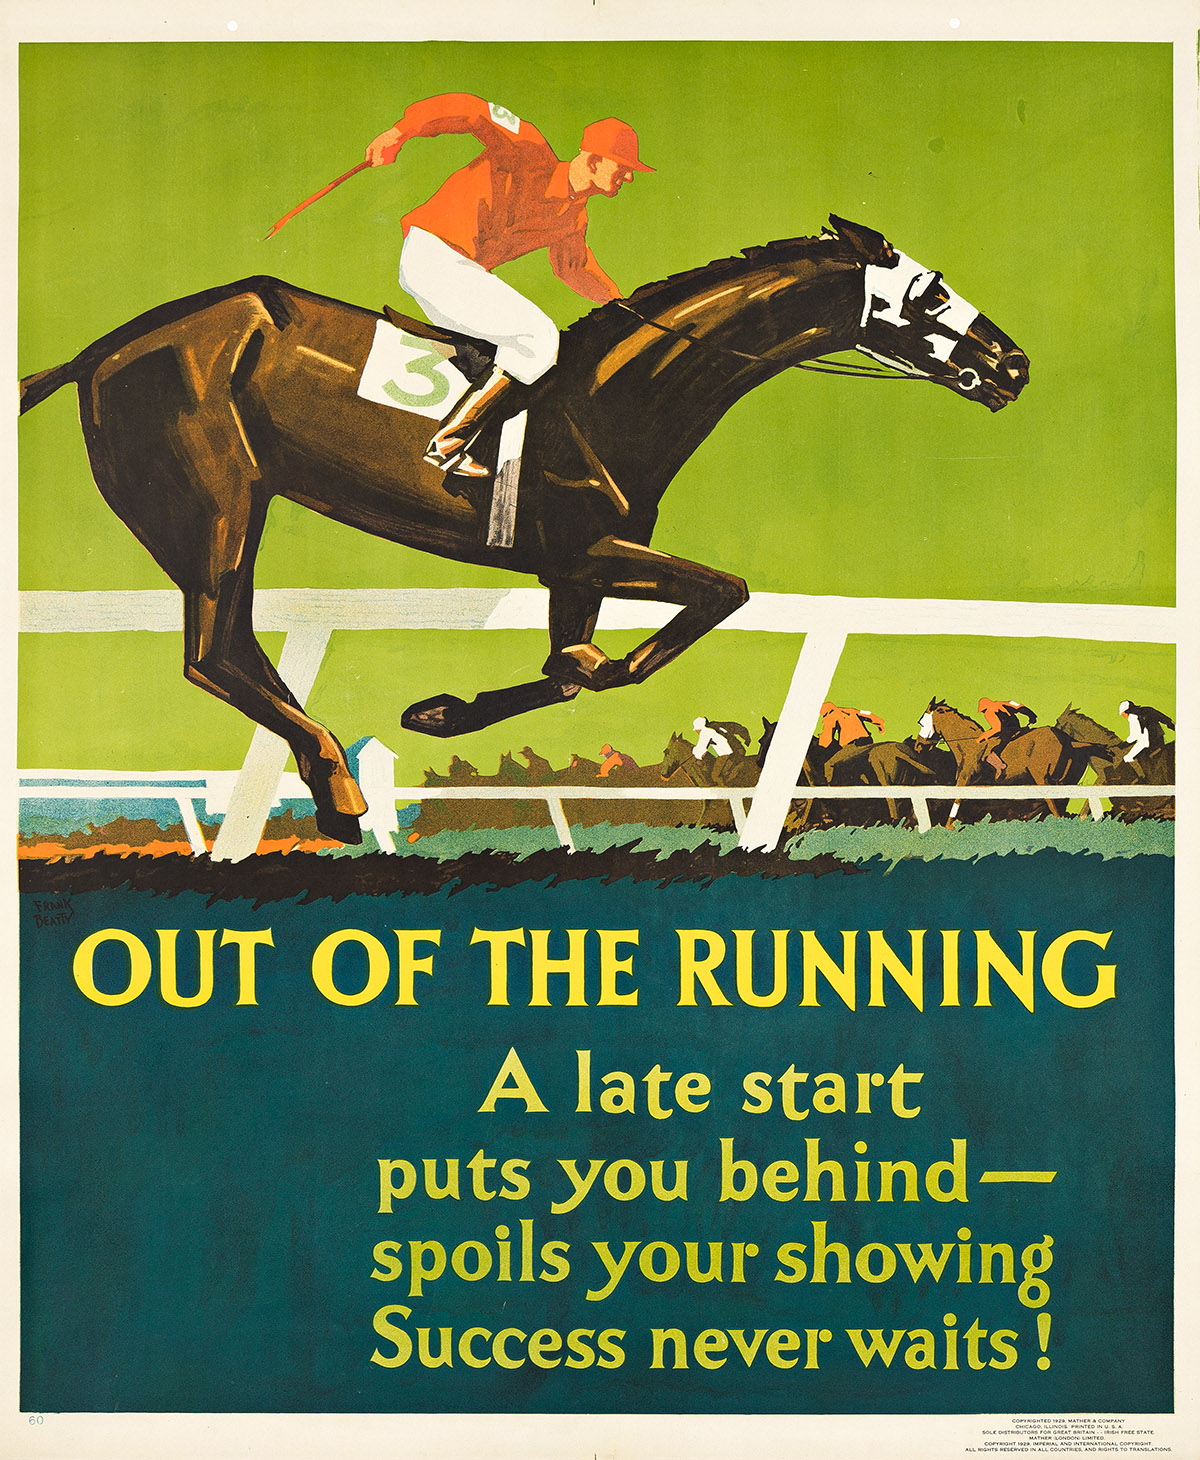 FRANK BEATTY (1899-1984). OUT OF THE RUNNING / SUCCESS NEVER WAITS! 1929. 43x36 inches, 190¼x91½ cm. Mather & Company, Chicago.